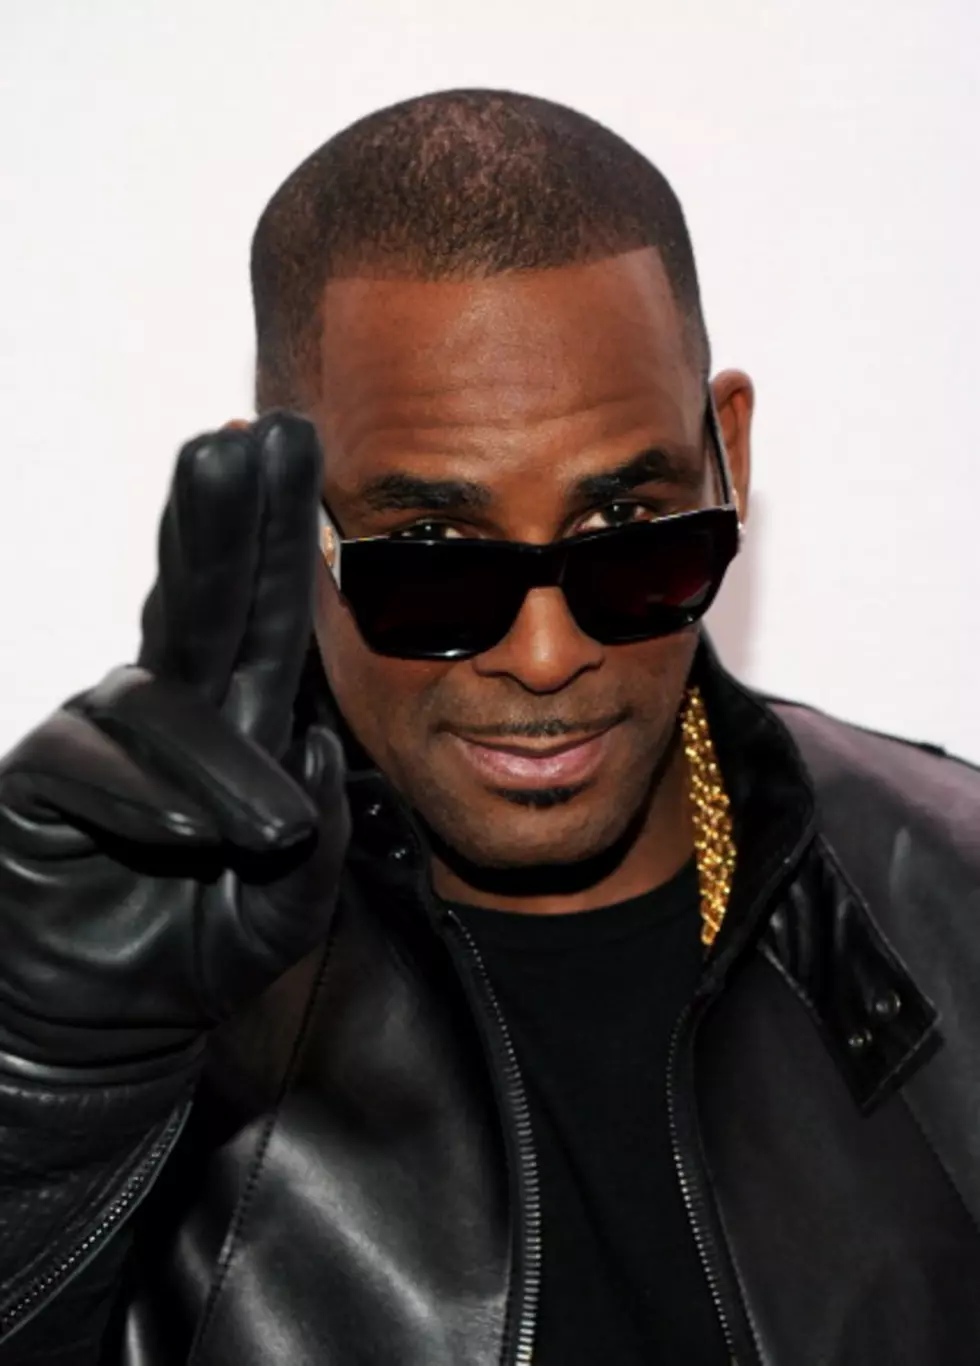 Party Goer calls Police on R Kelly and says he has an arrest warrant out